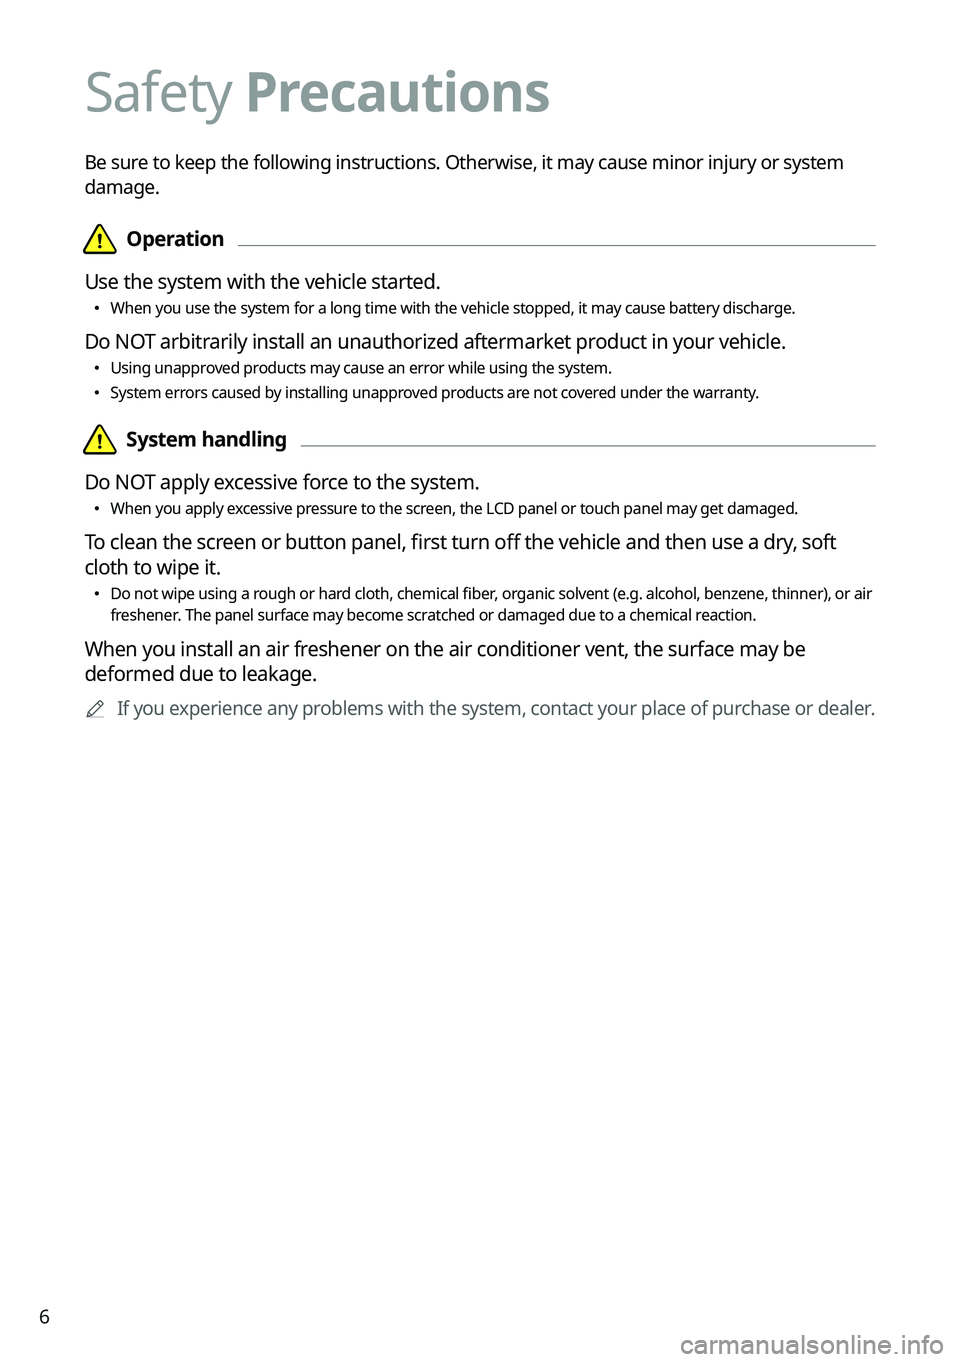 KIA SOUL 2022  Navigation System Quick Reference Guide 6
Safety Precautions
Be sure to keep the following instructions. Otherwise, it may cause minor injury or system 
damage.
  \334\334Operation
Use the system with the vehicle started.
 \225 When you use